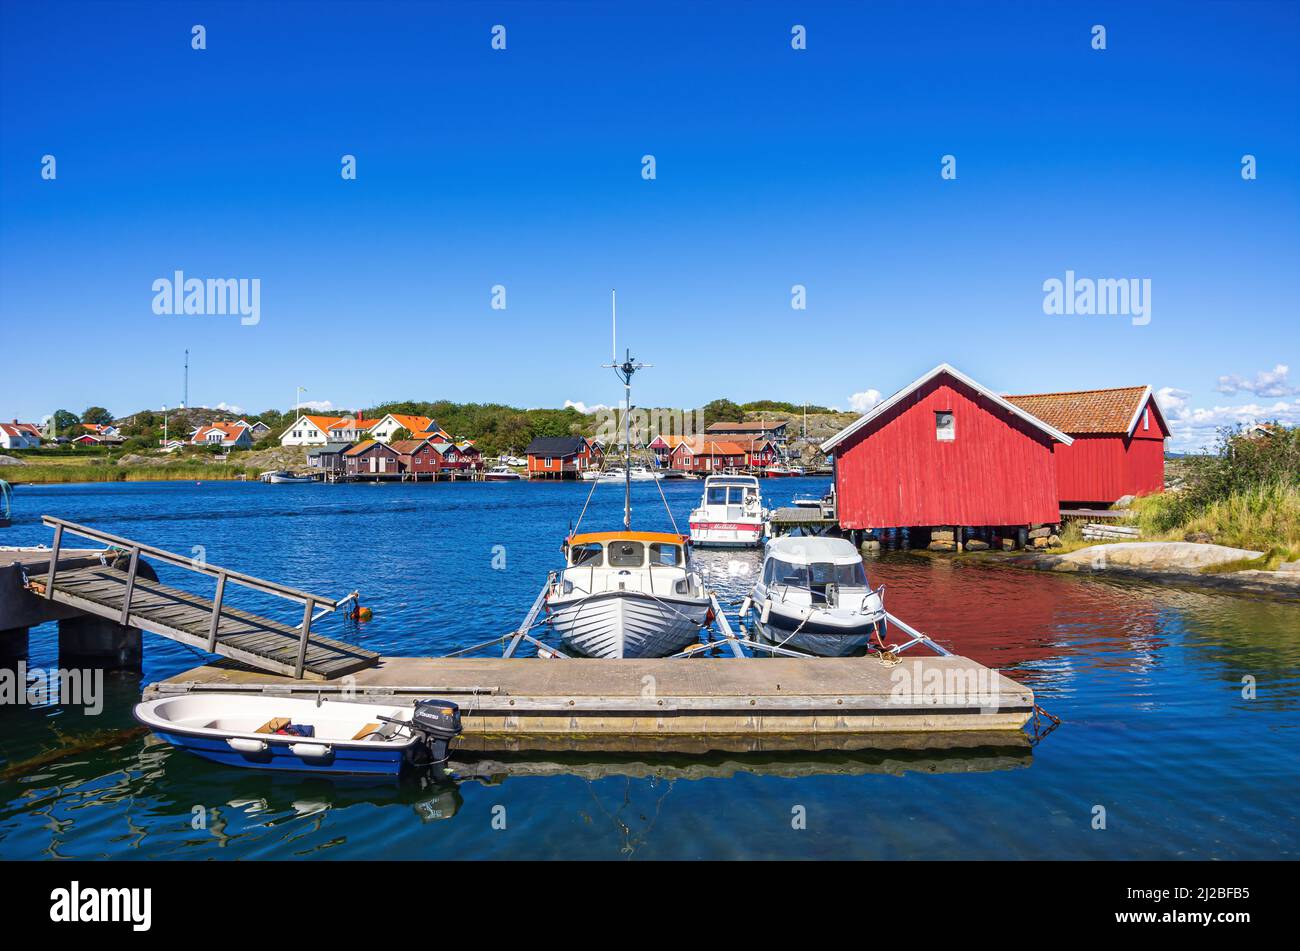 South Koster Island, Bohuslän, Västra Götalands län, Sweden: Jetty with boats and boat sheds in the picturesque village of Langegarde. Stock Photo